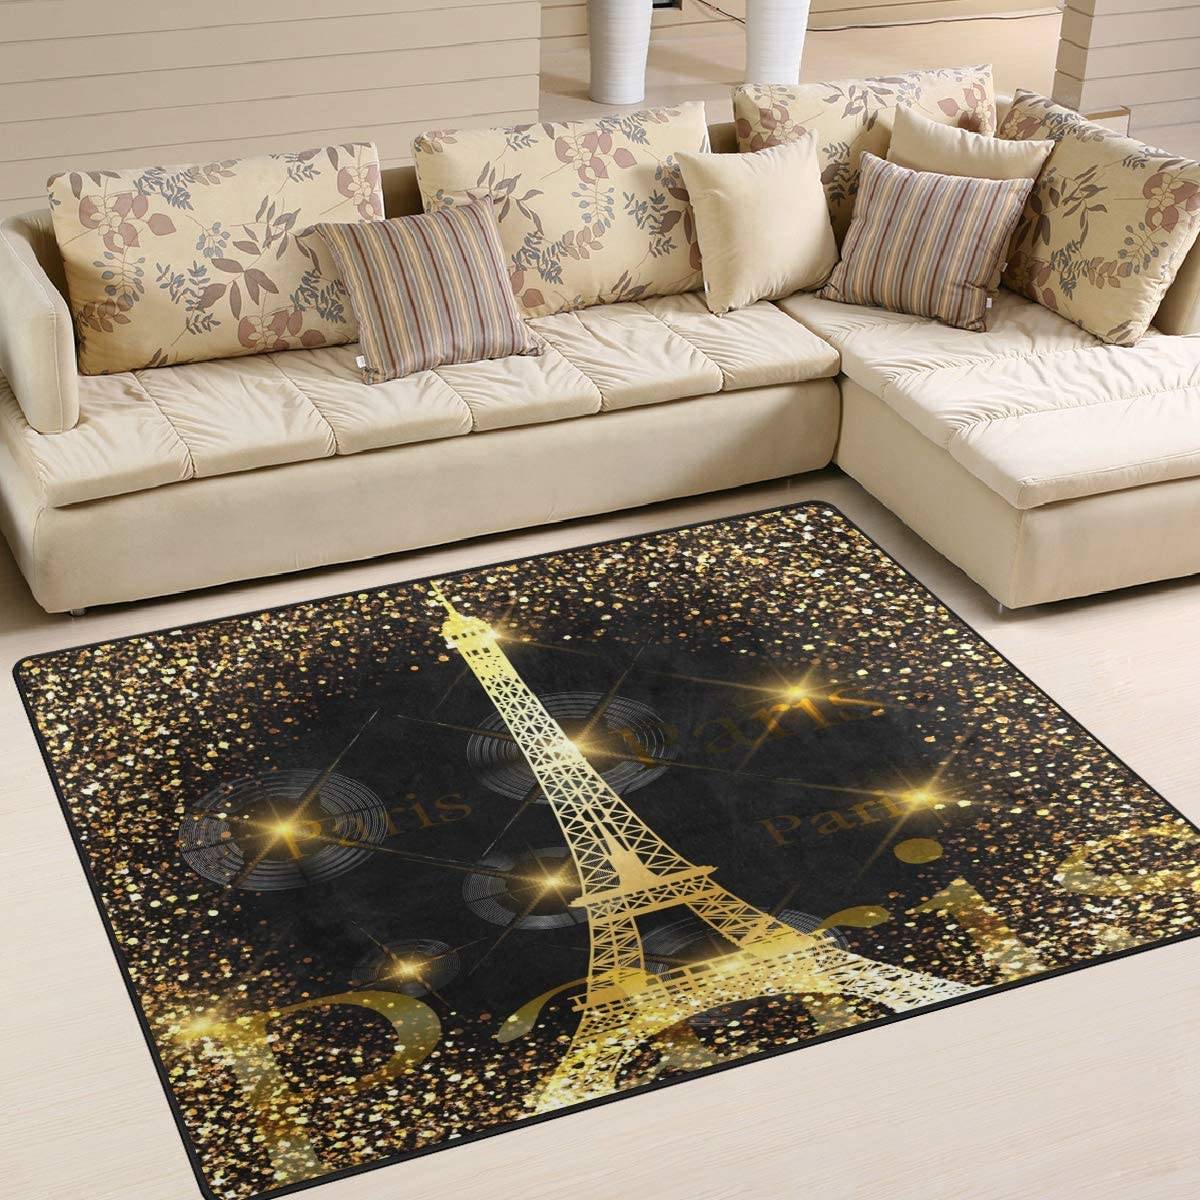 ALAZA Vintage Paris Eiffel Tower Valentine's Day Area Rug Rugs for Living Room Bedroom 7' x 5' 